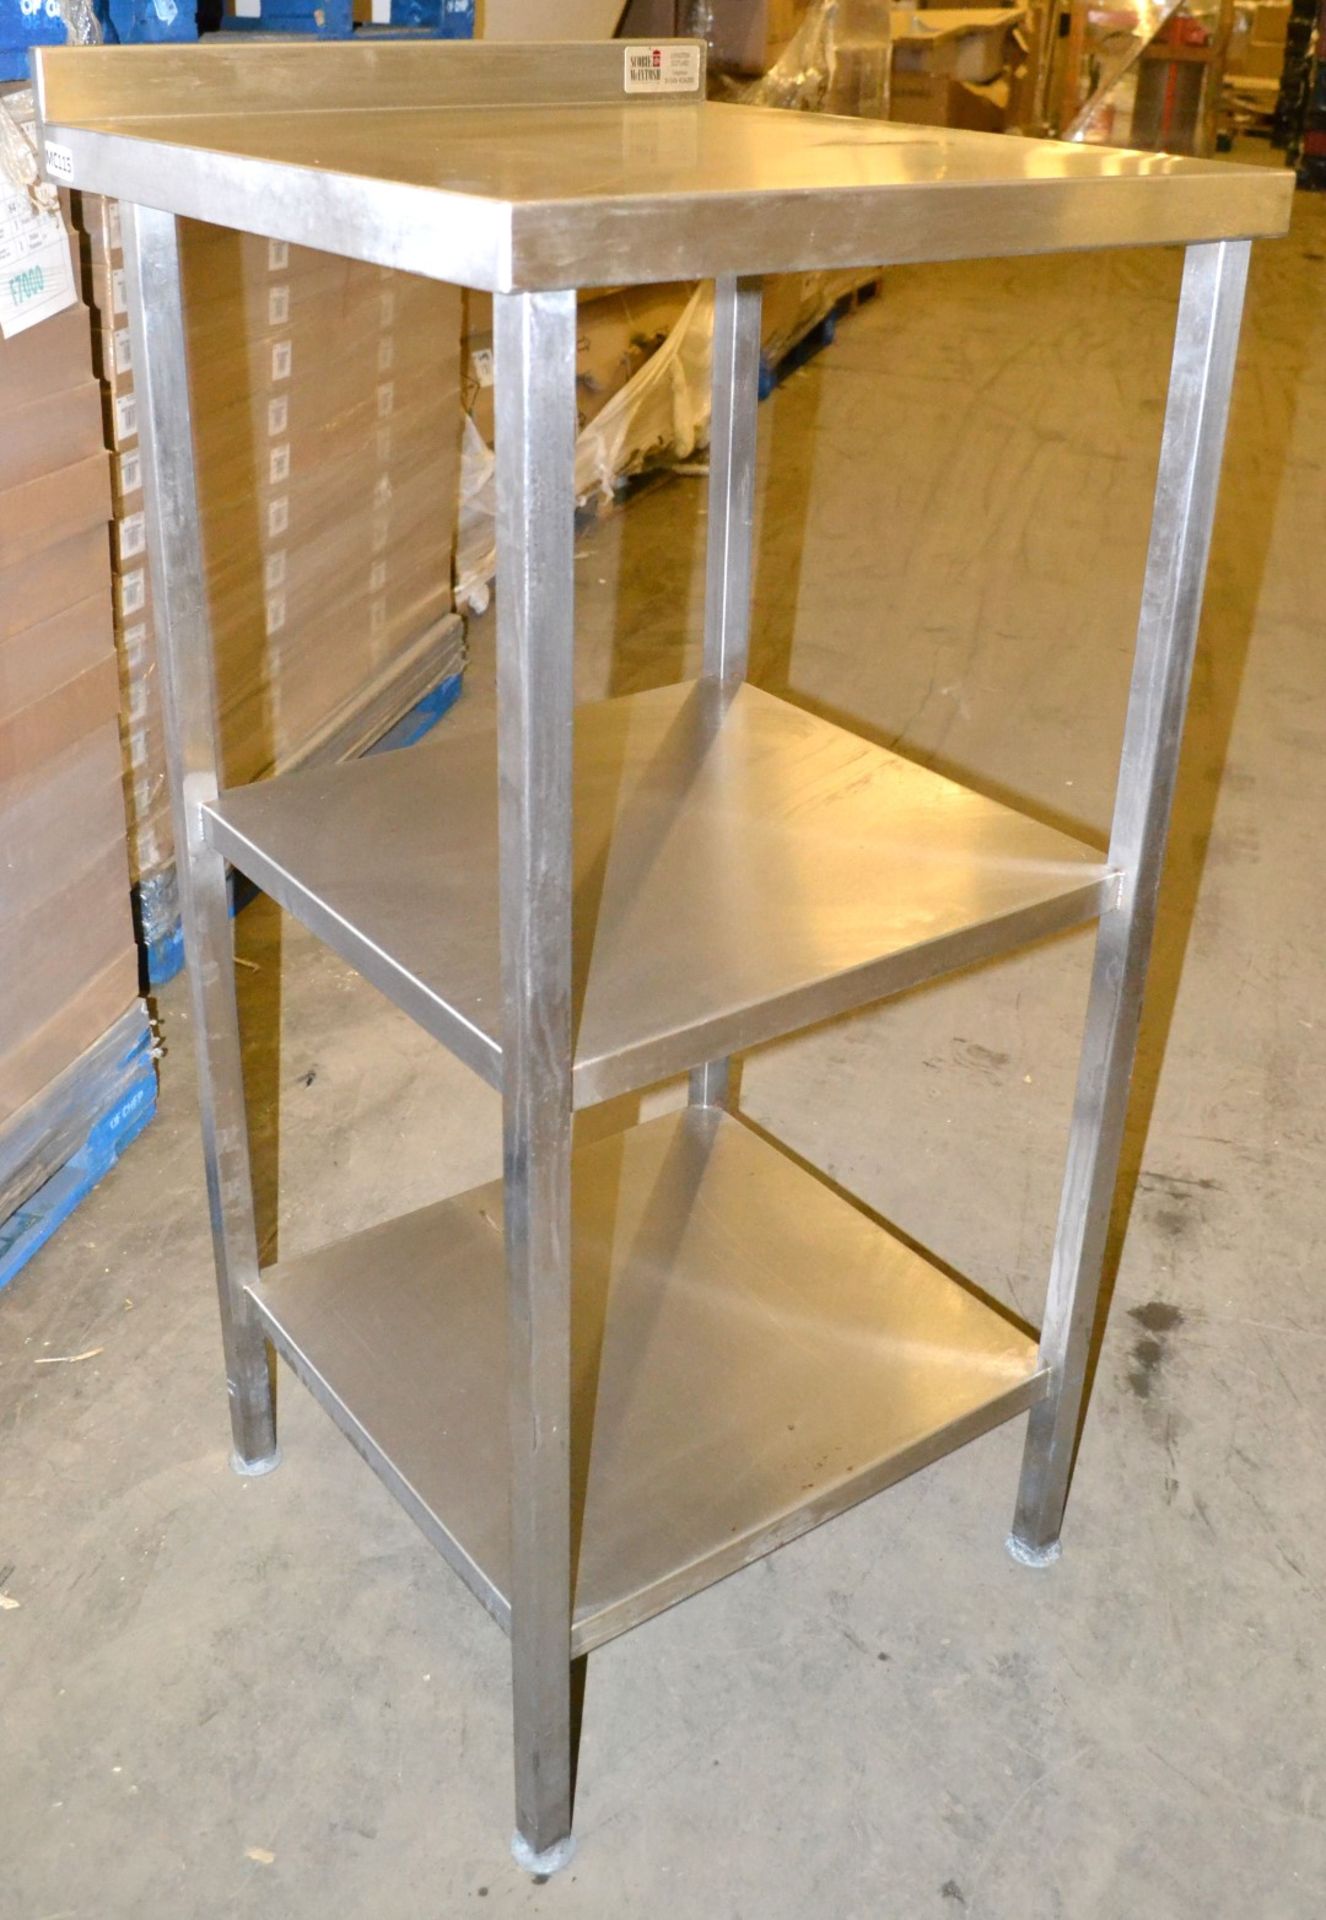 1 x Tall Stainless Steel Scobie McIntosh Prep Table - Dimensions: 60 x 65 x 124cm - Ref: MC115 - CL2 - Image 8 of 8